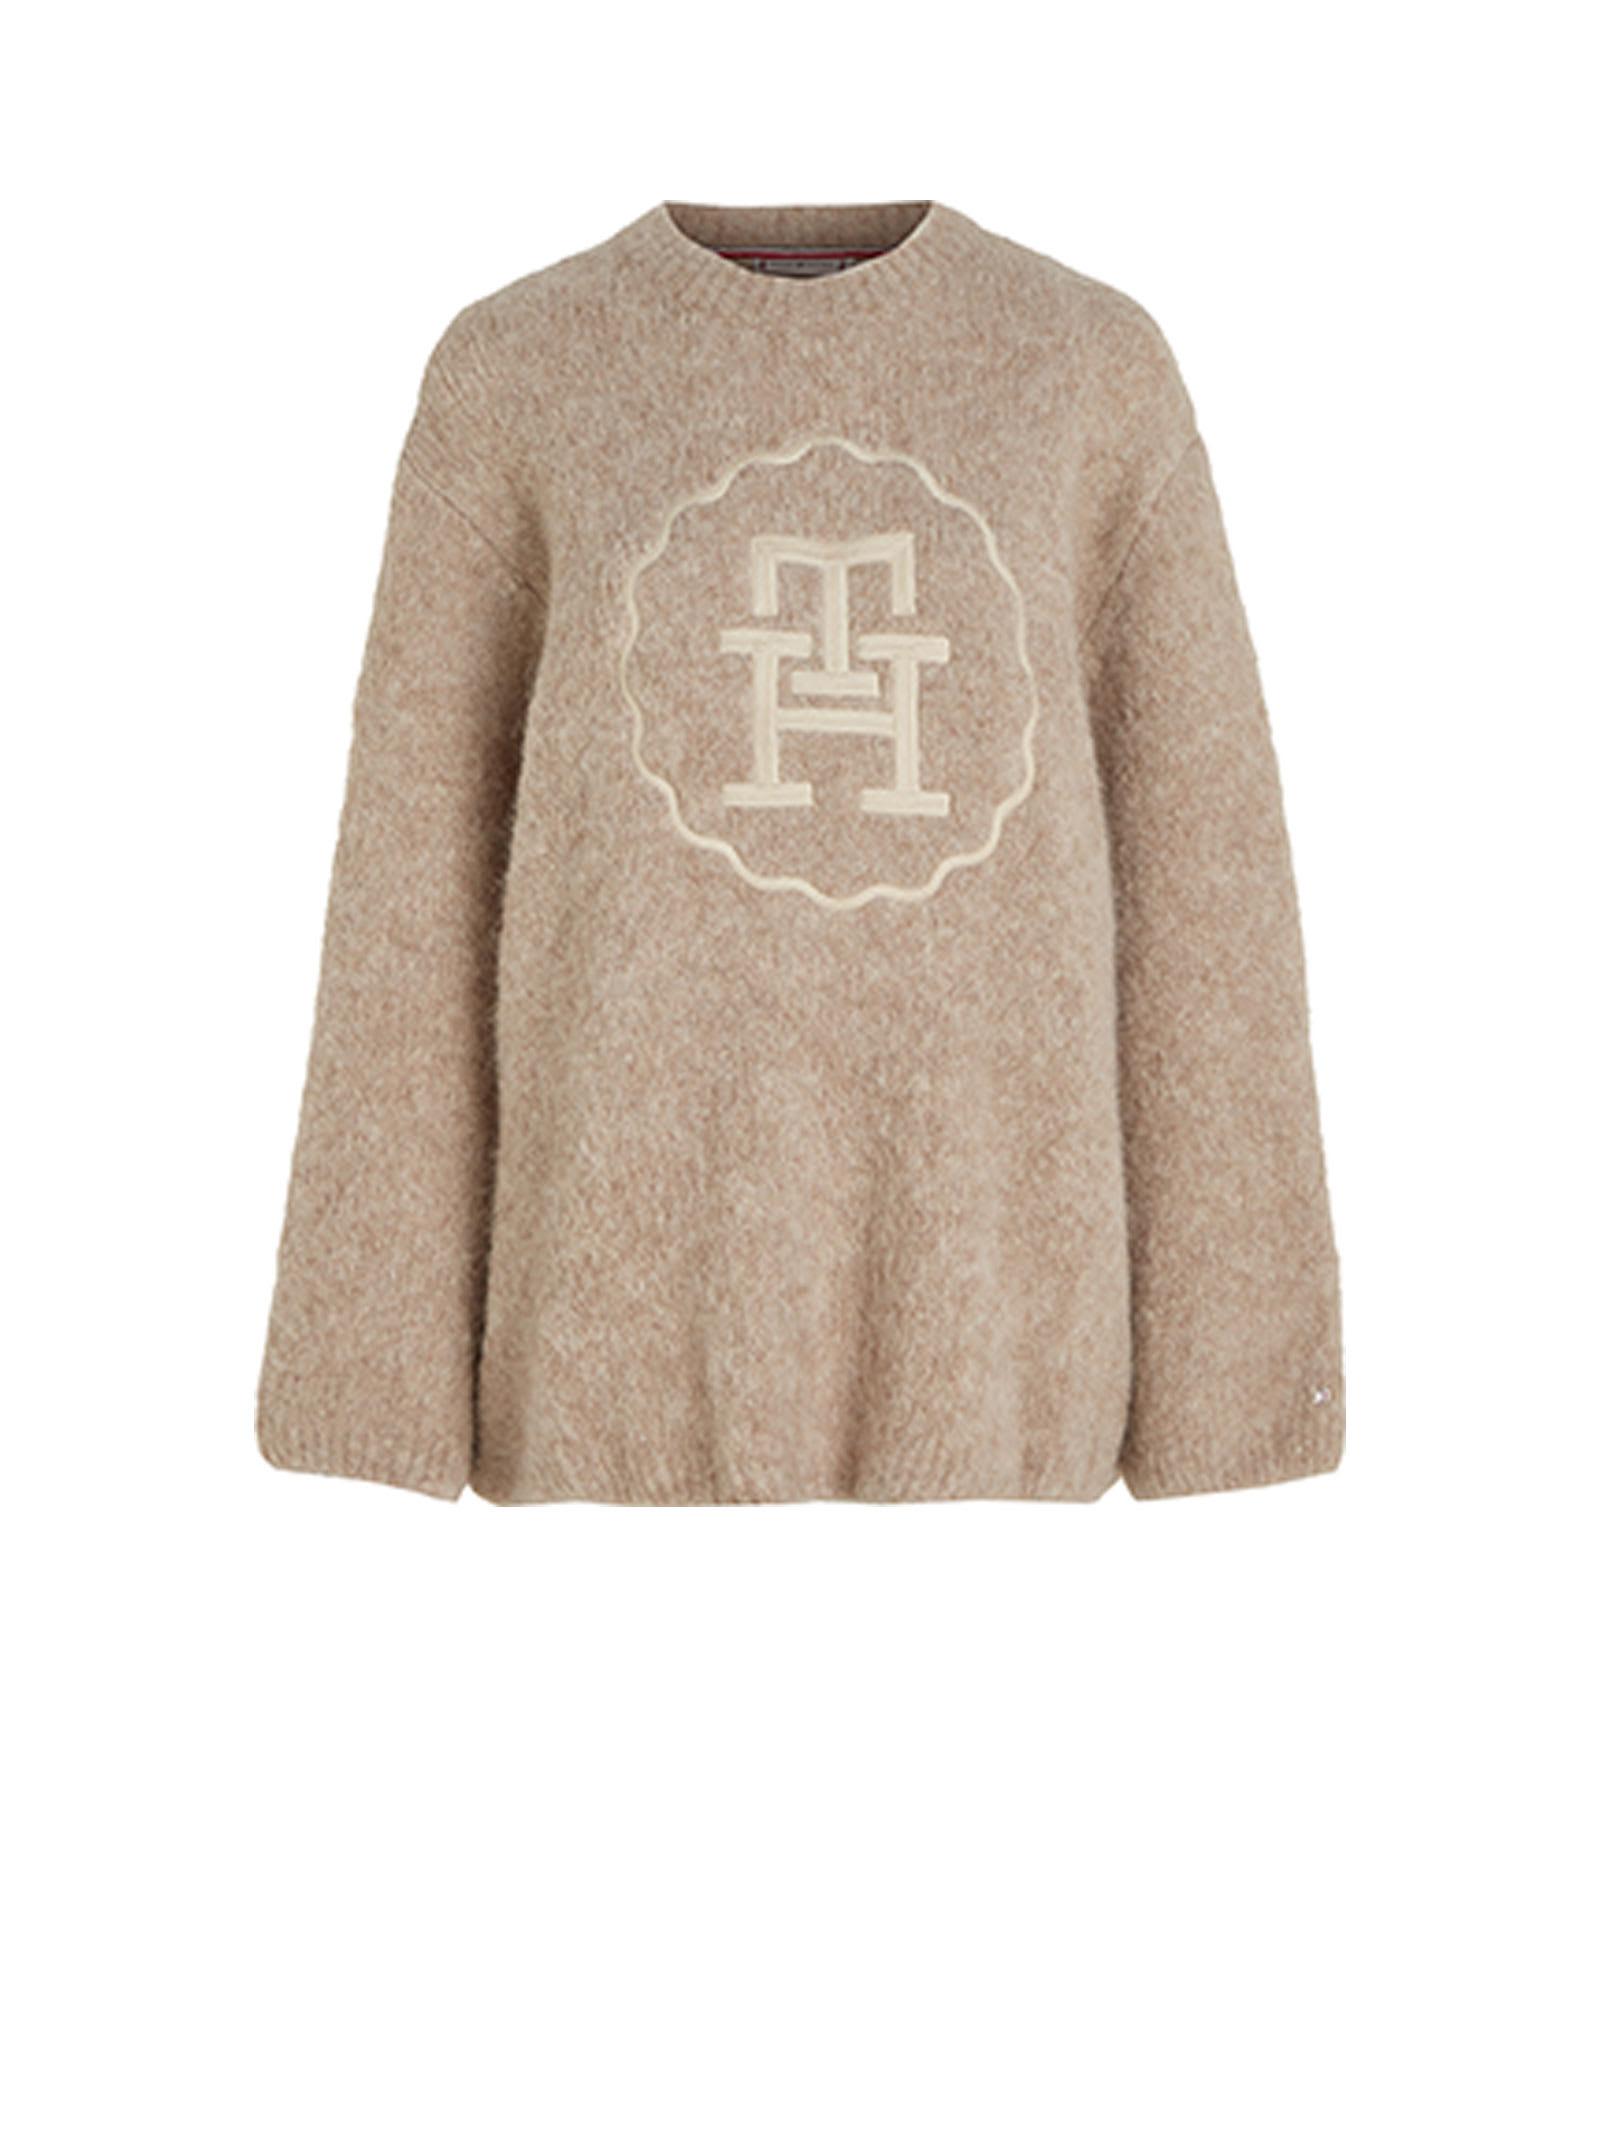 Tommy Hilfiger Oversized Sweater In Alpaca Blend in Natural | Lyst